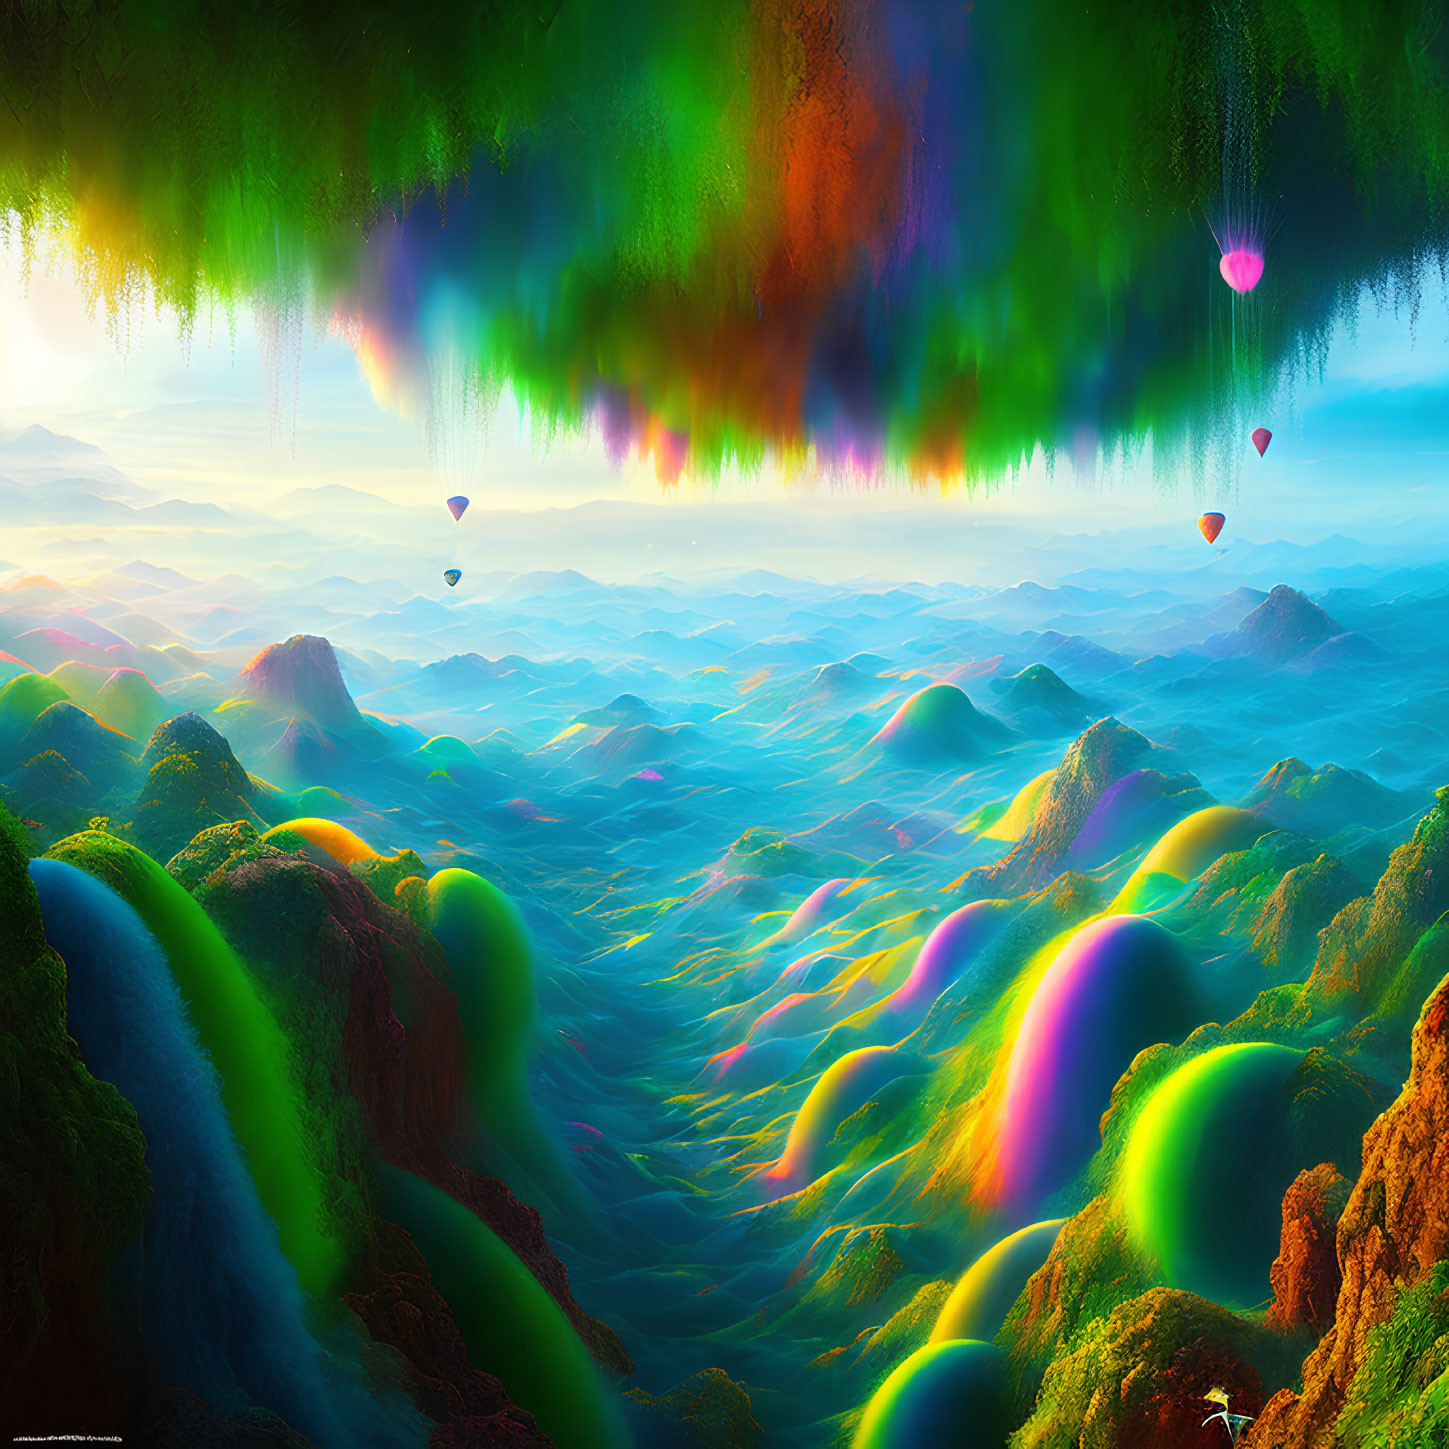 Colorful Fantasy Landscape with Hot Air Balloons and Upside-Down Forest